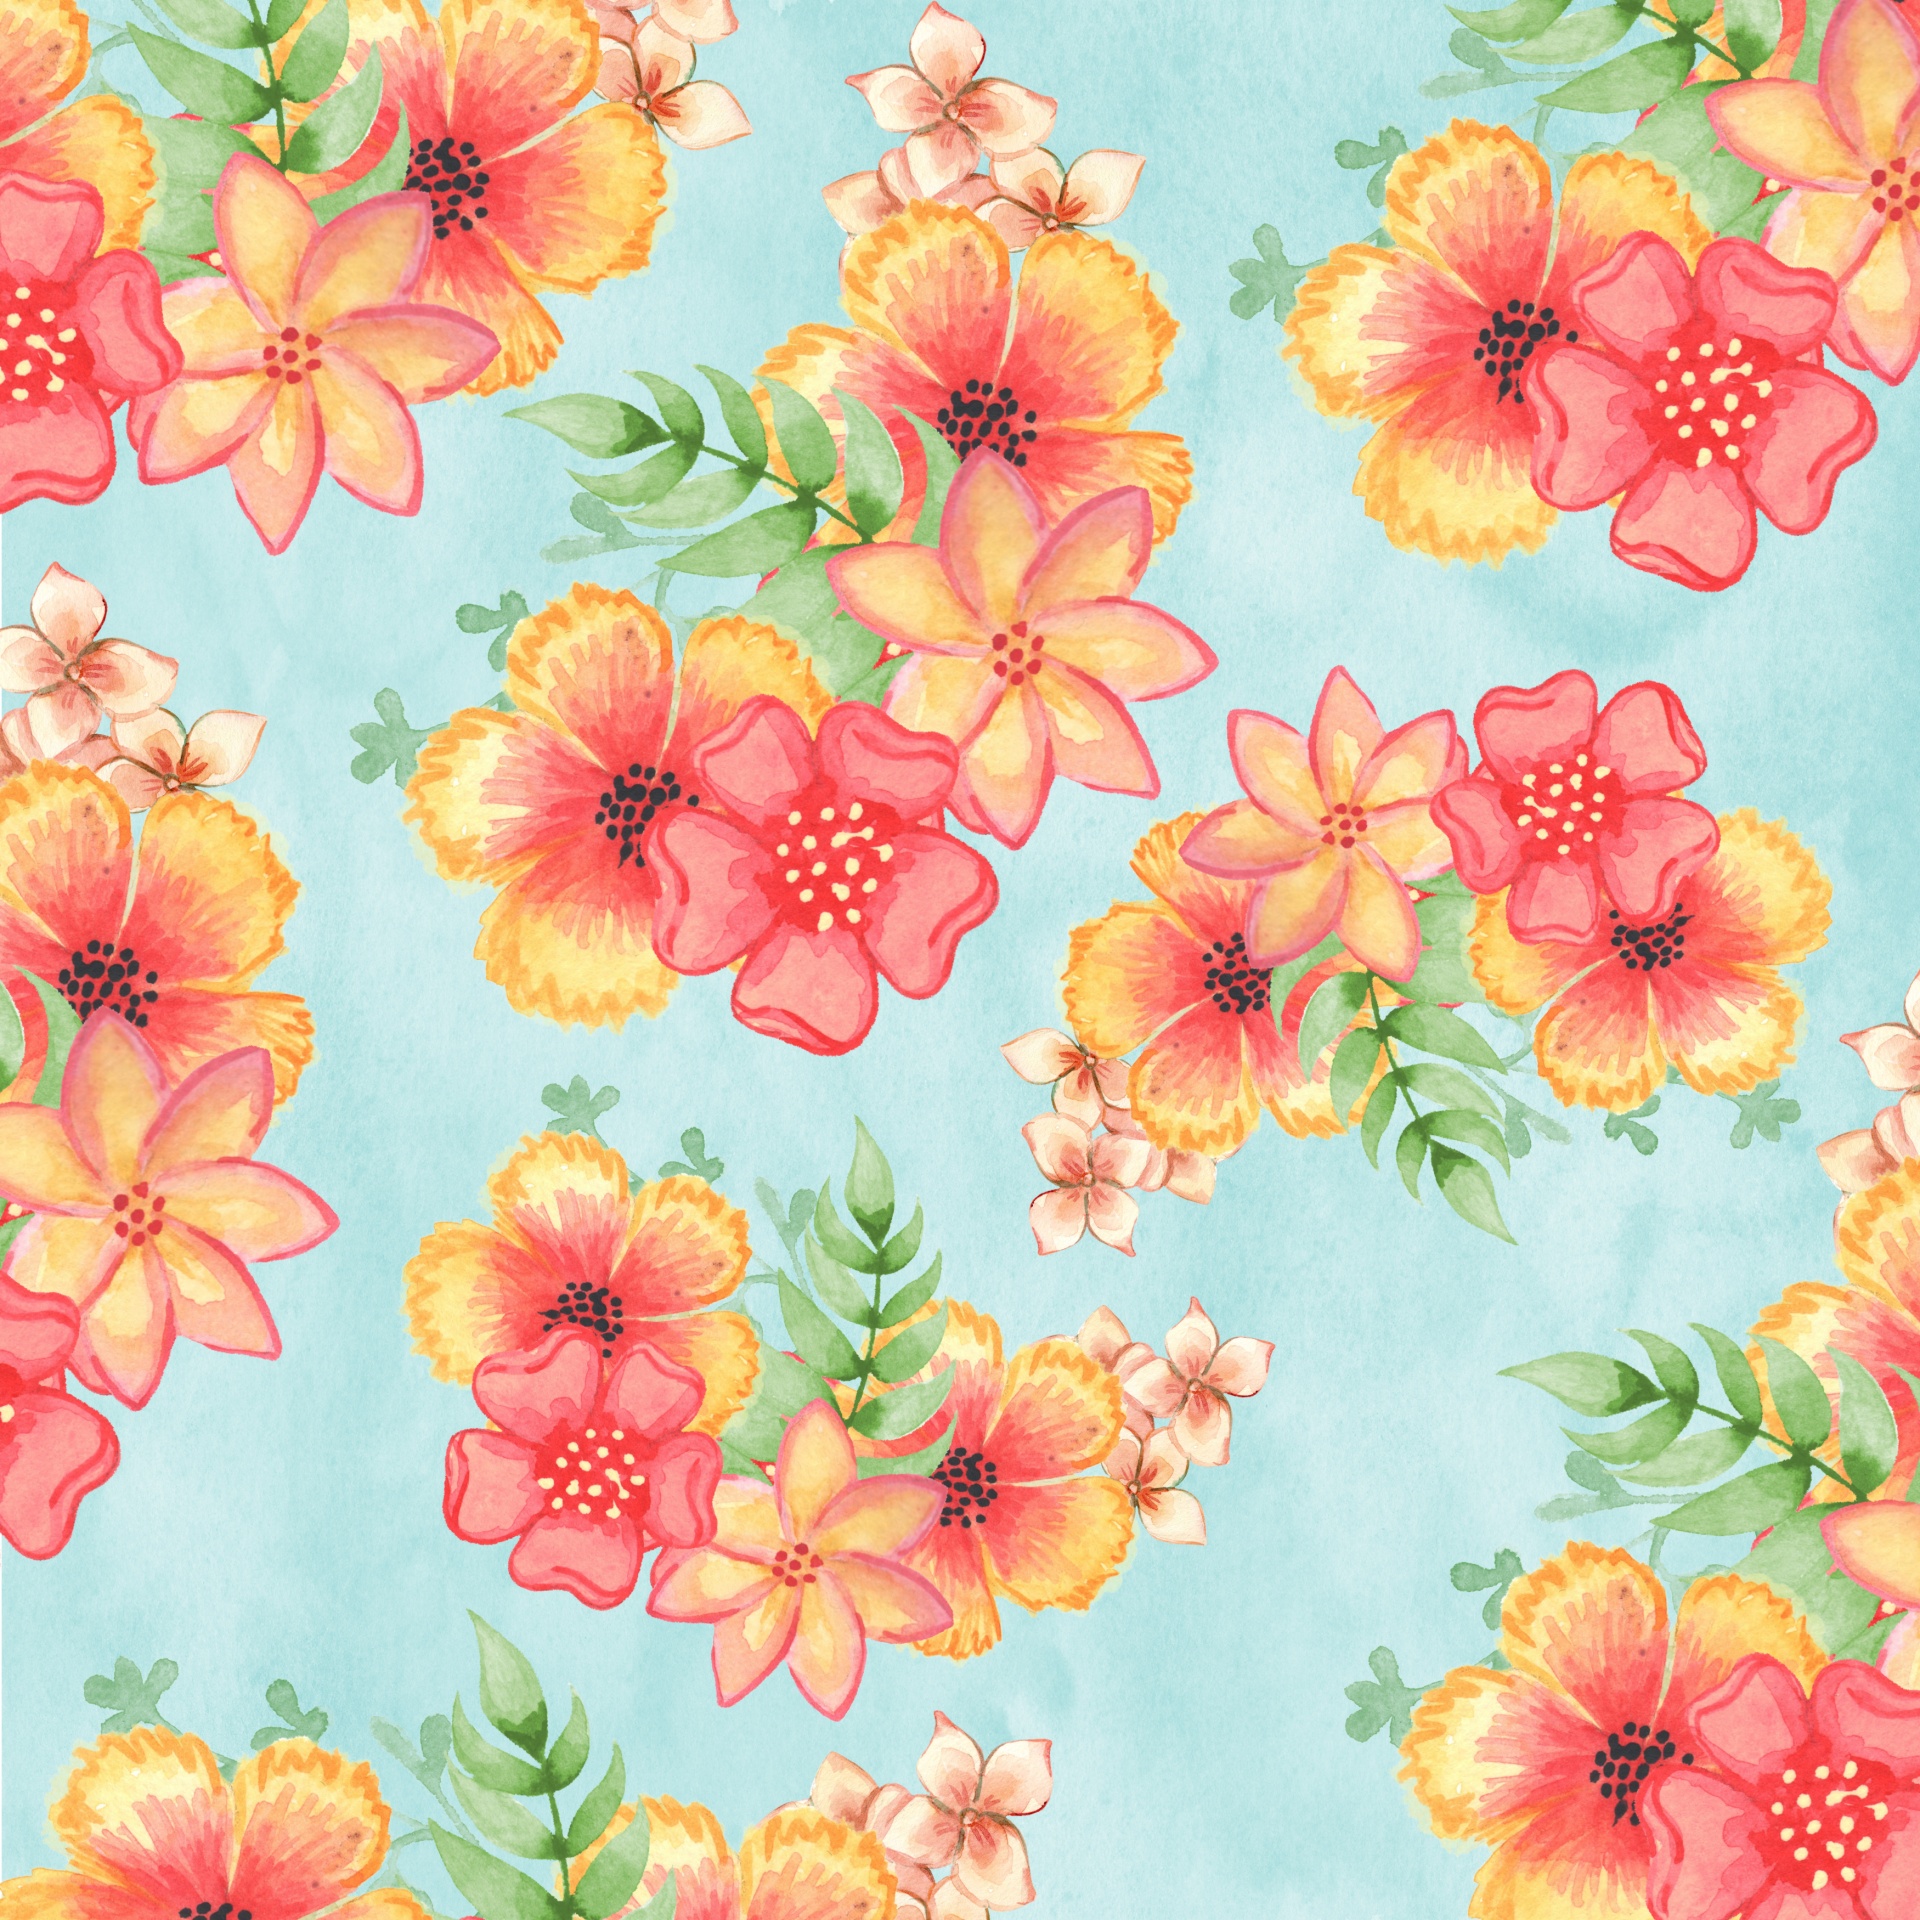 Floral Wallpaper Watercolor Free Stock Photo - Public Domain Pictures